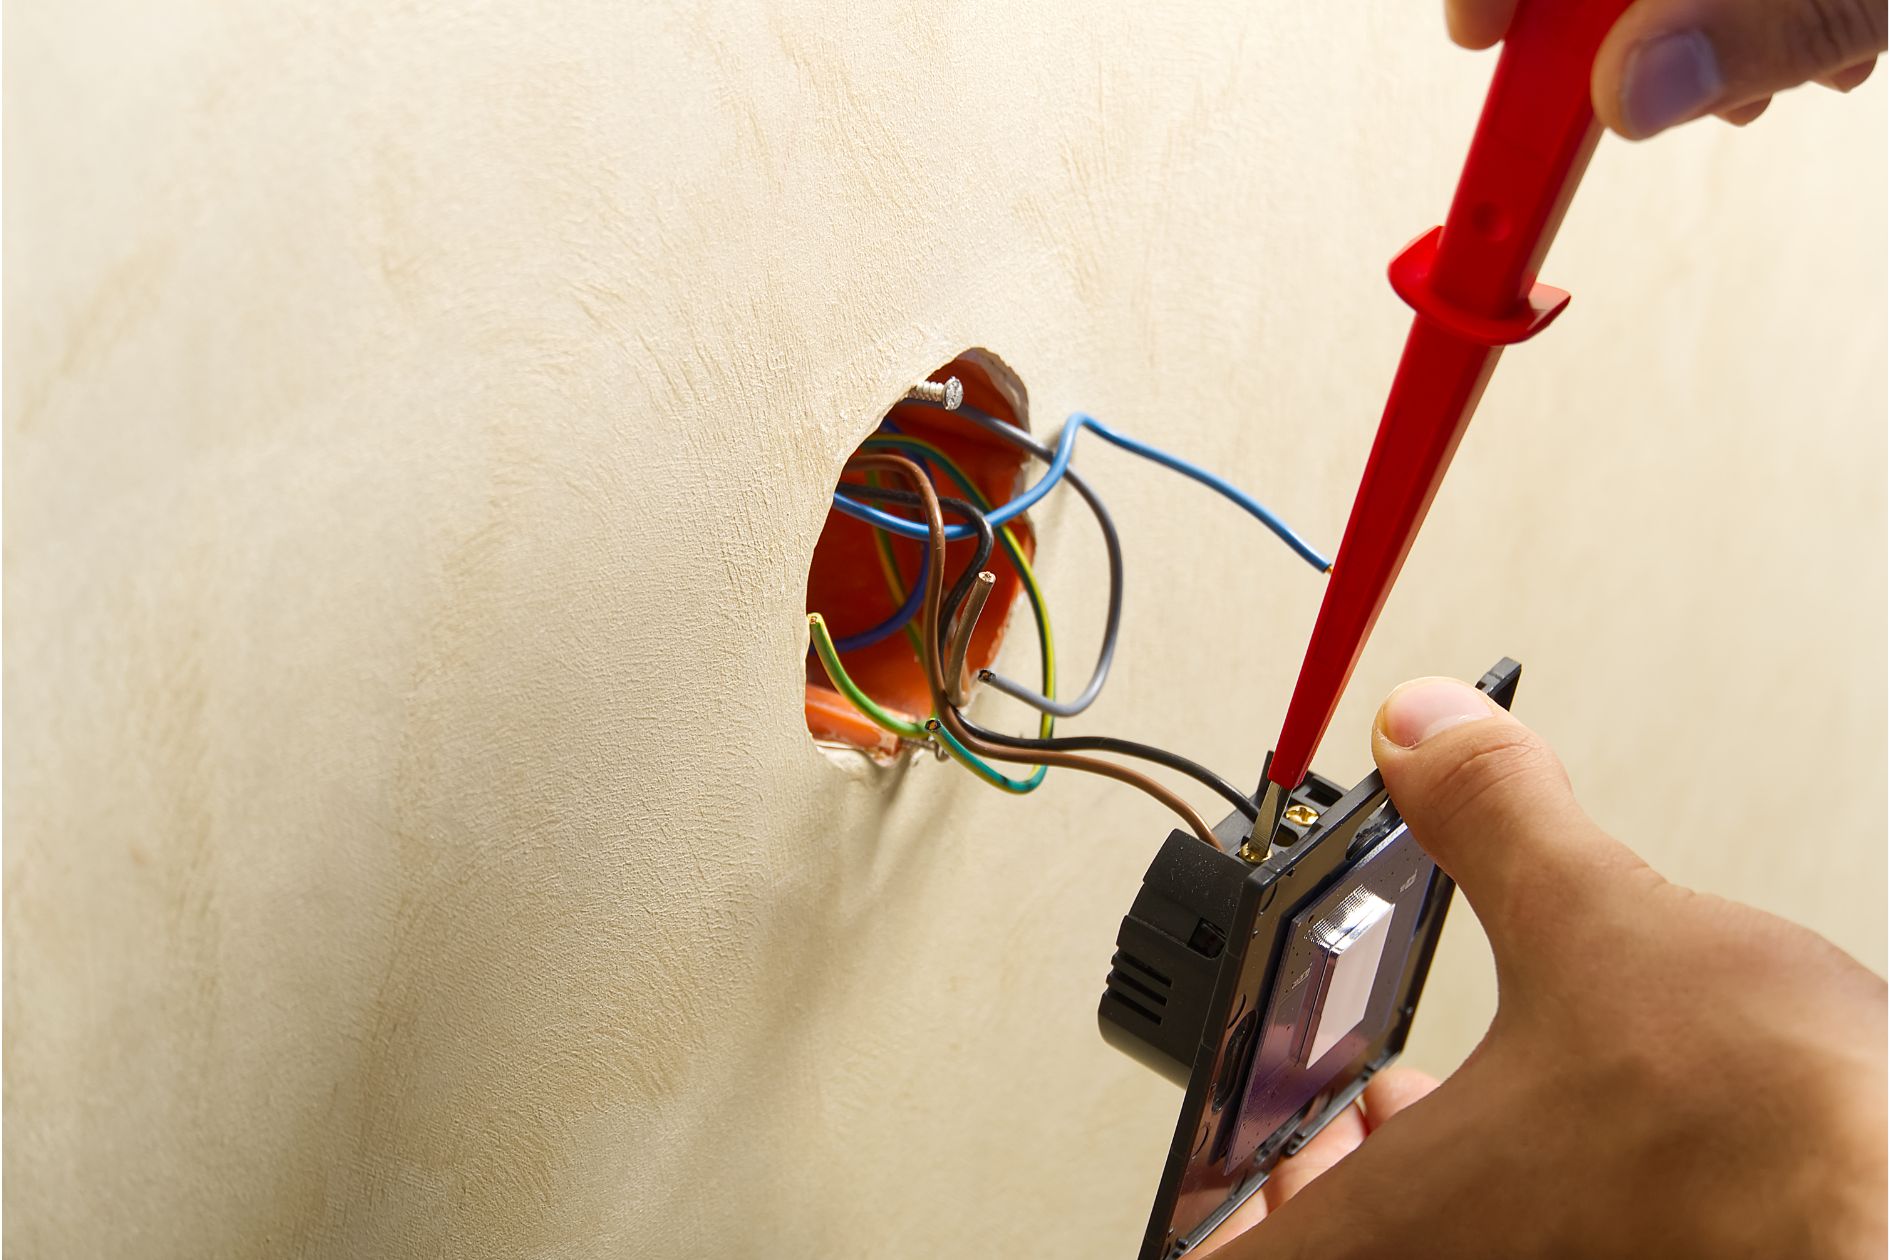 DIY Light Switch Installation: Tips and Safety Measures